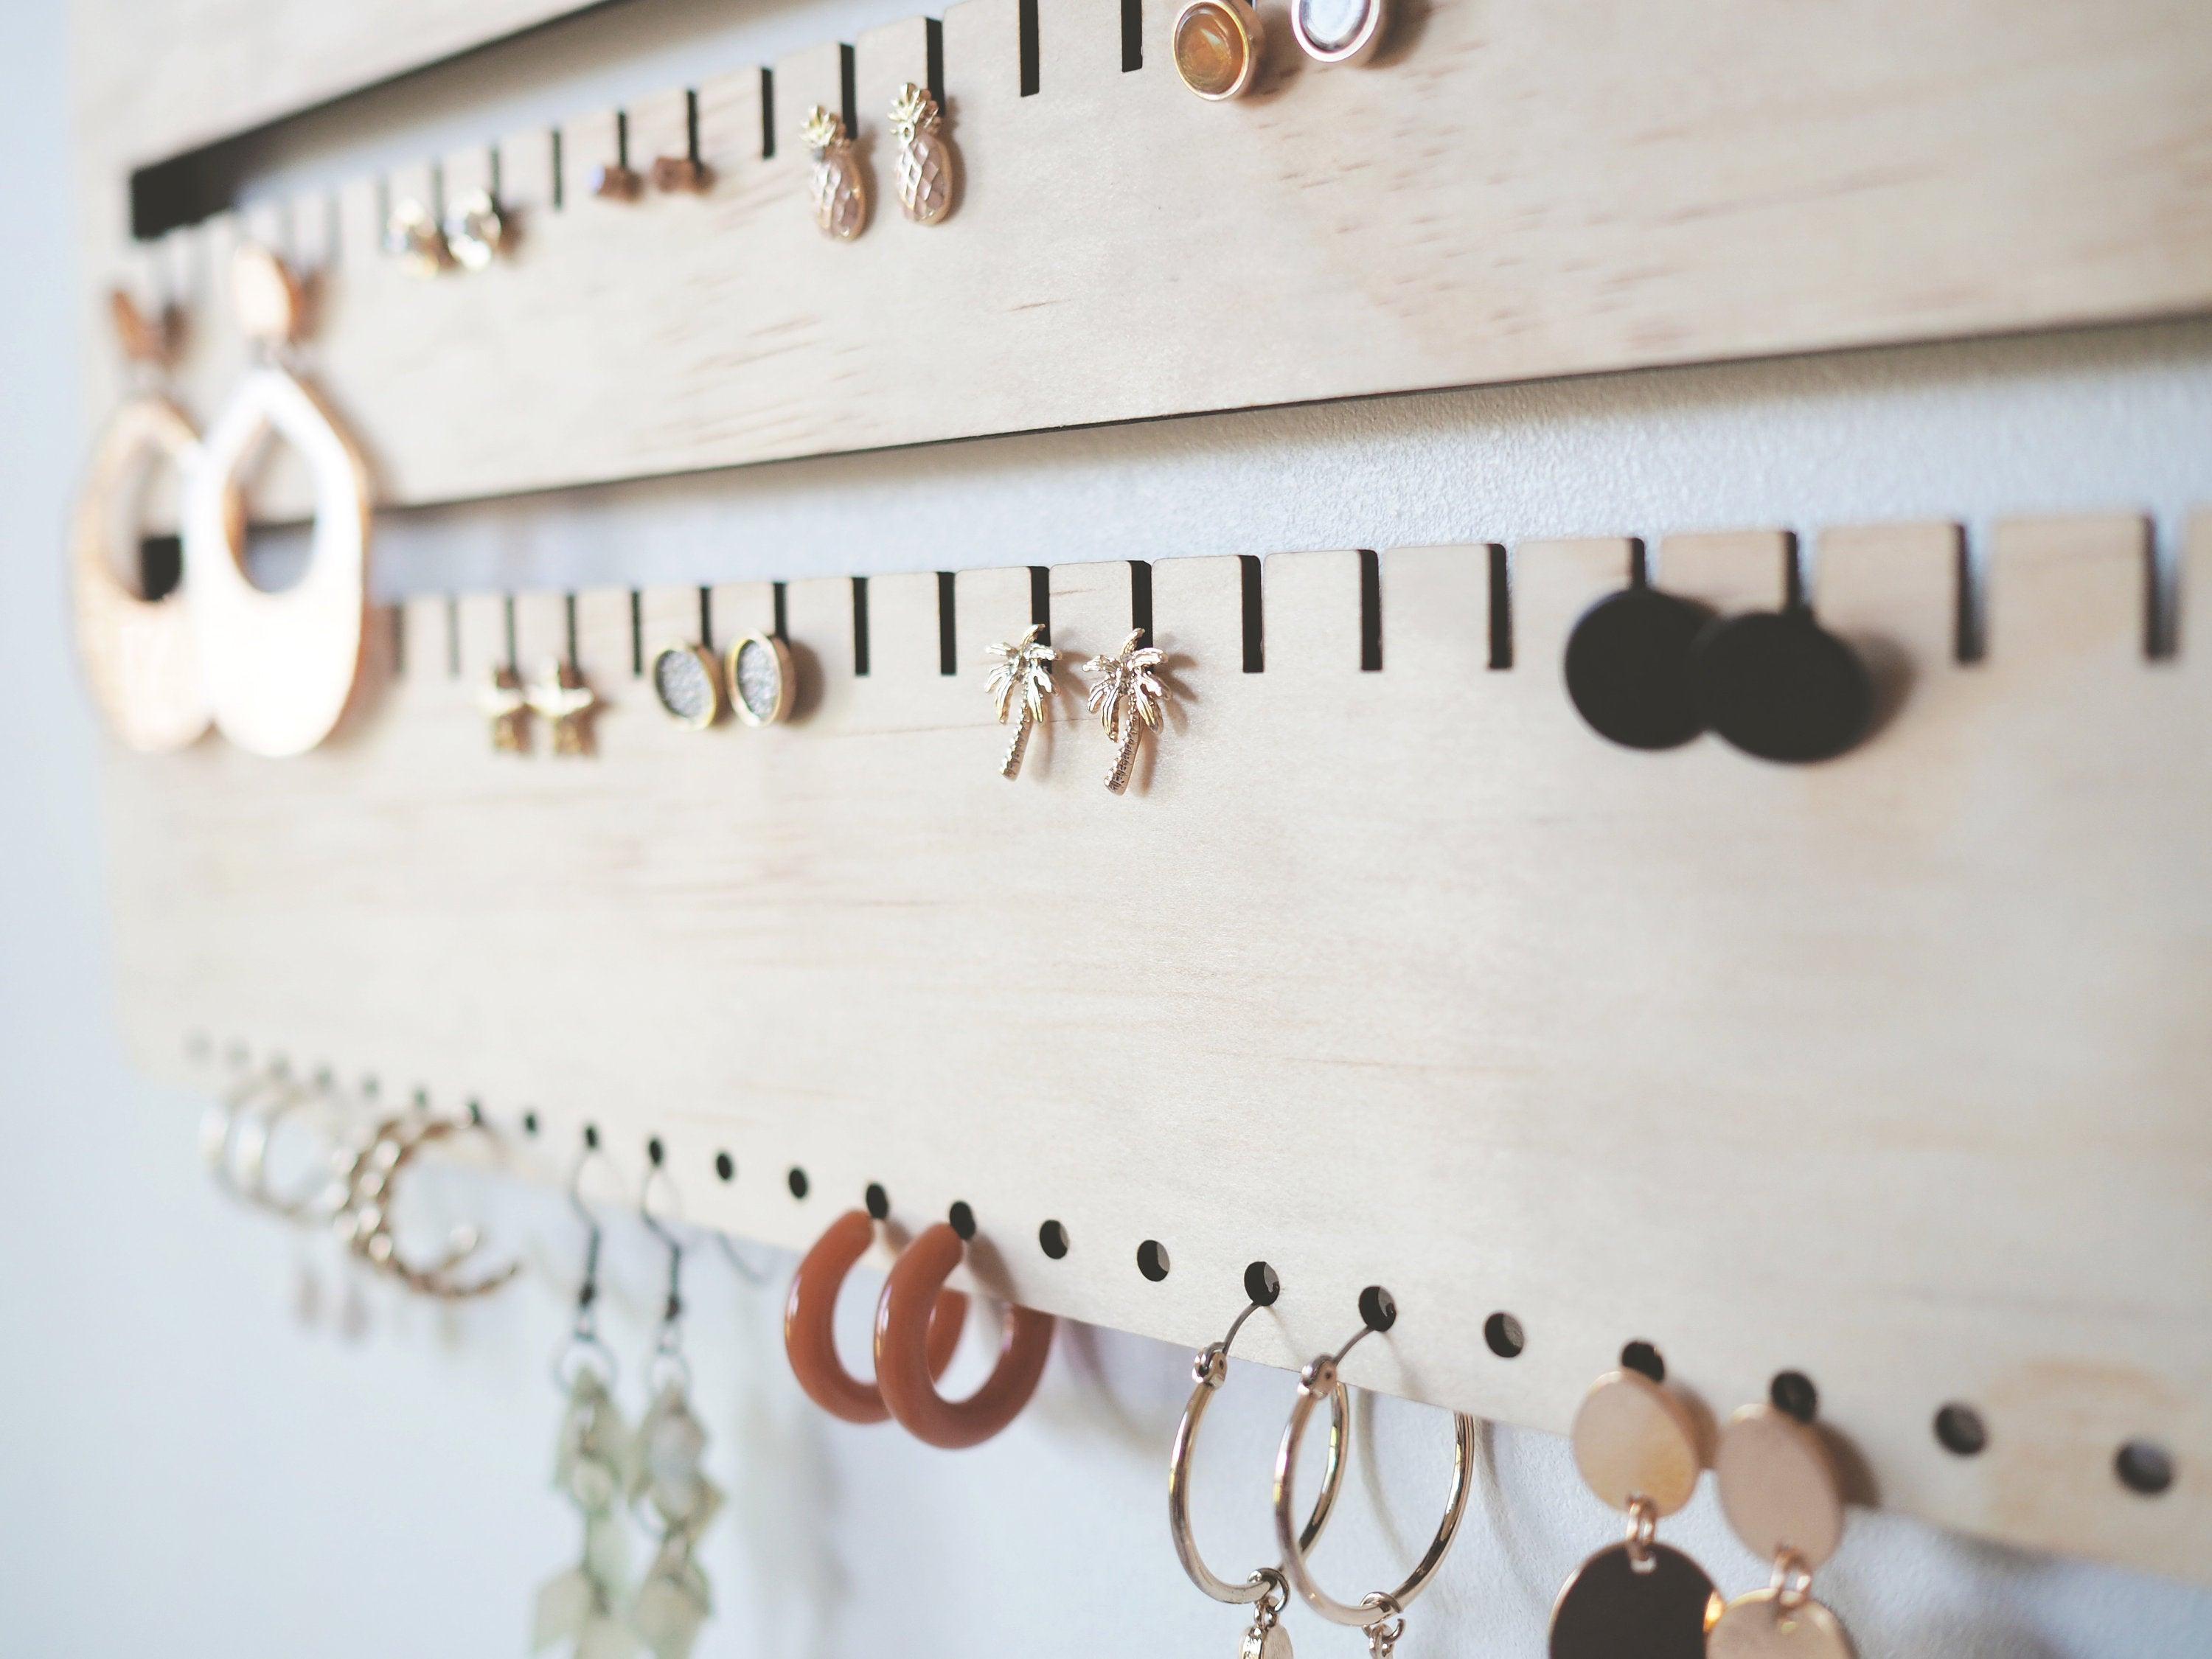 Make this Chic DIY Jewelry Statement Wall for Under $65 | NEVER SKIP BRUNCH  by Cara Newhart